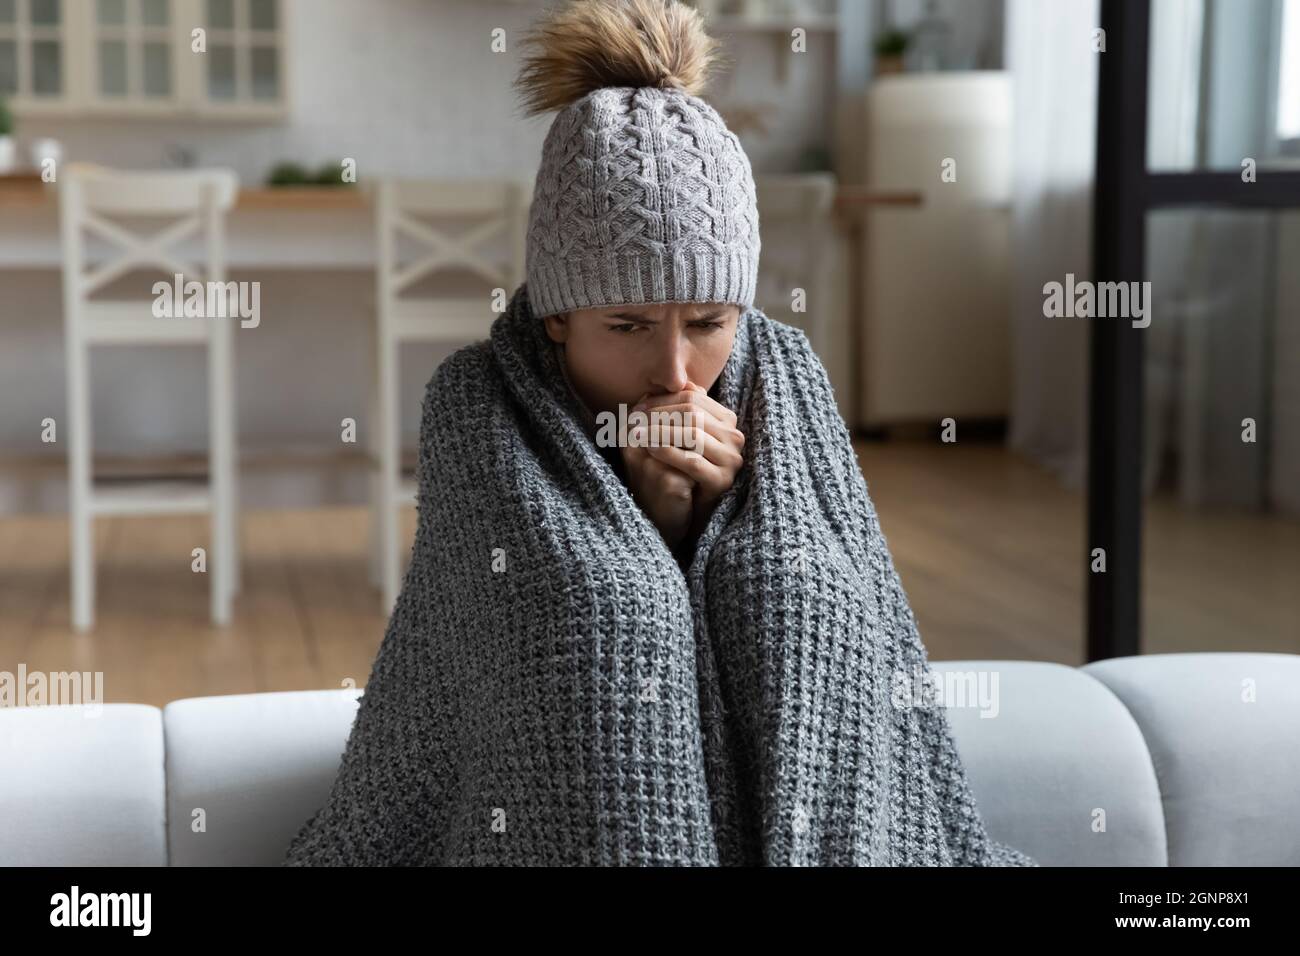 Unwell woman feel cold in home with no heating Stock Photo